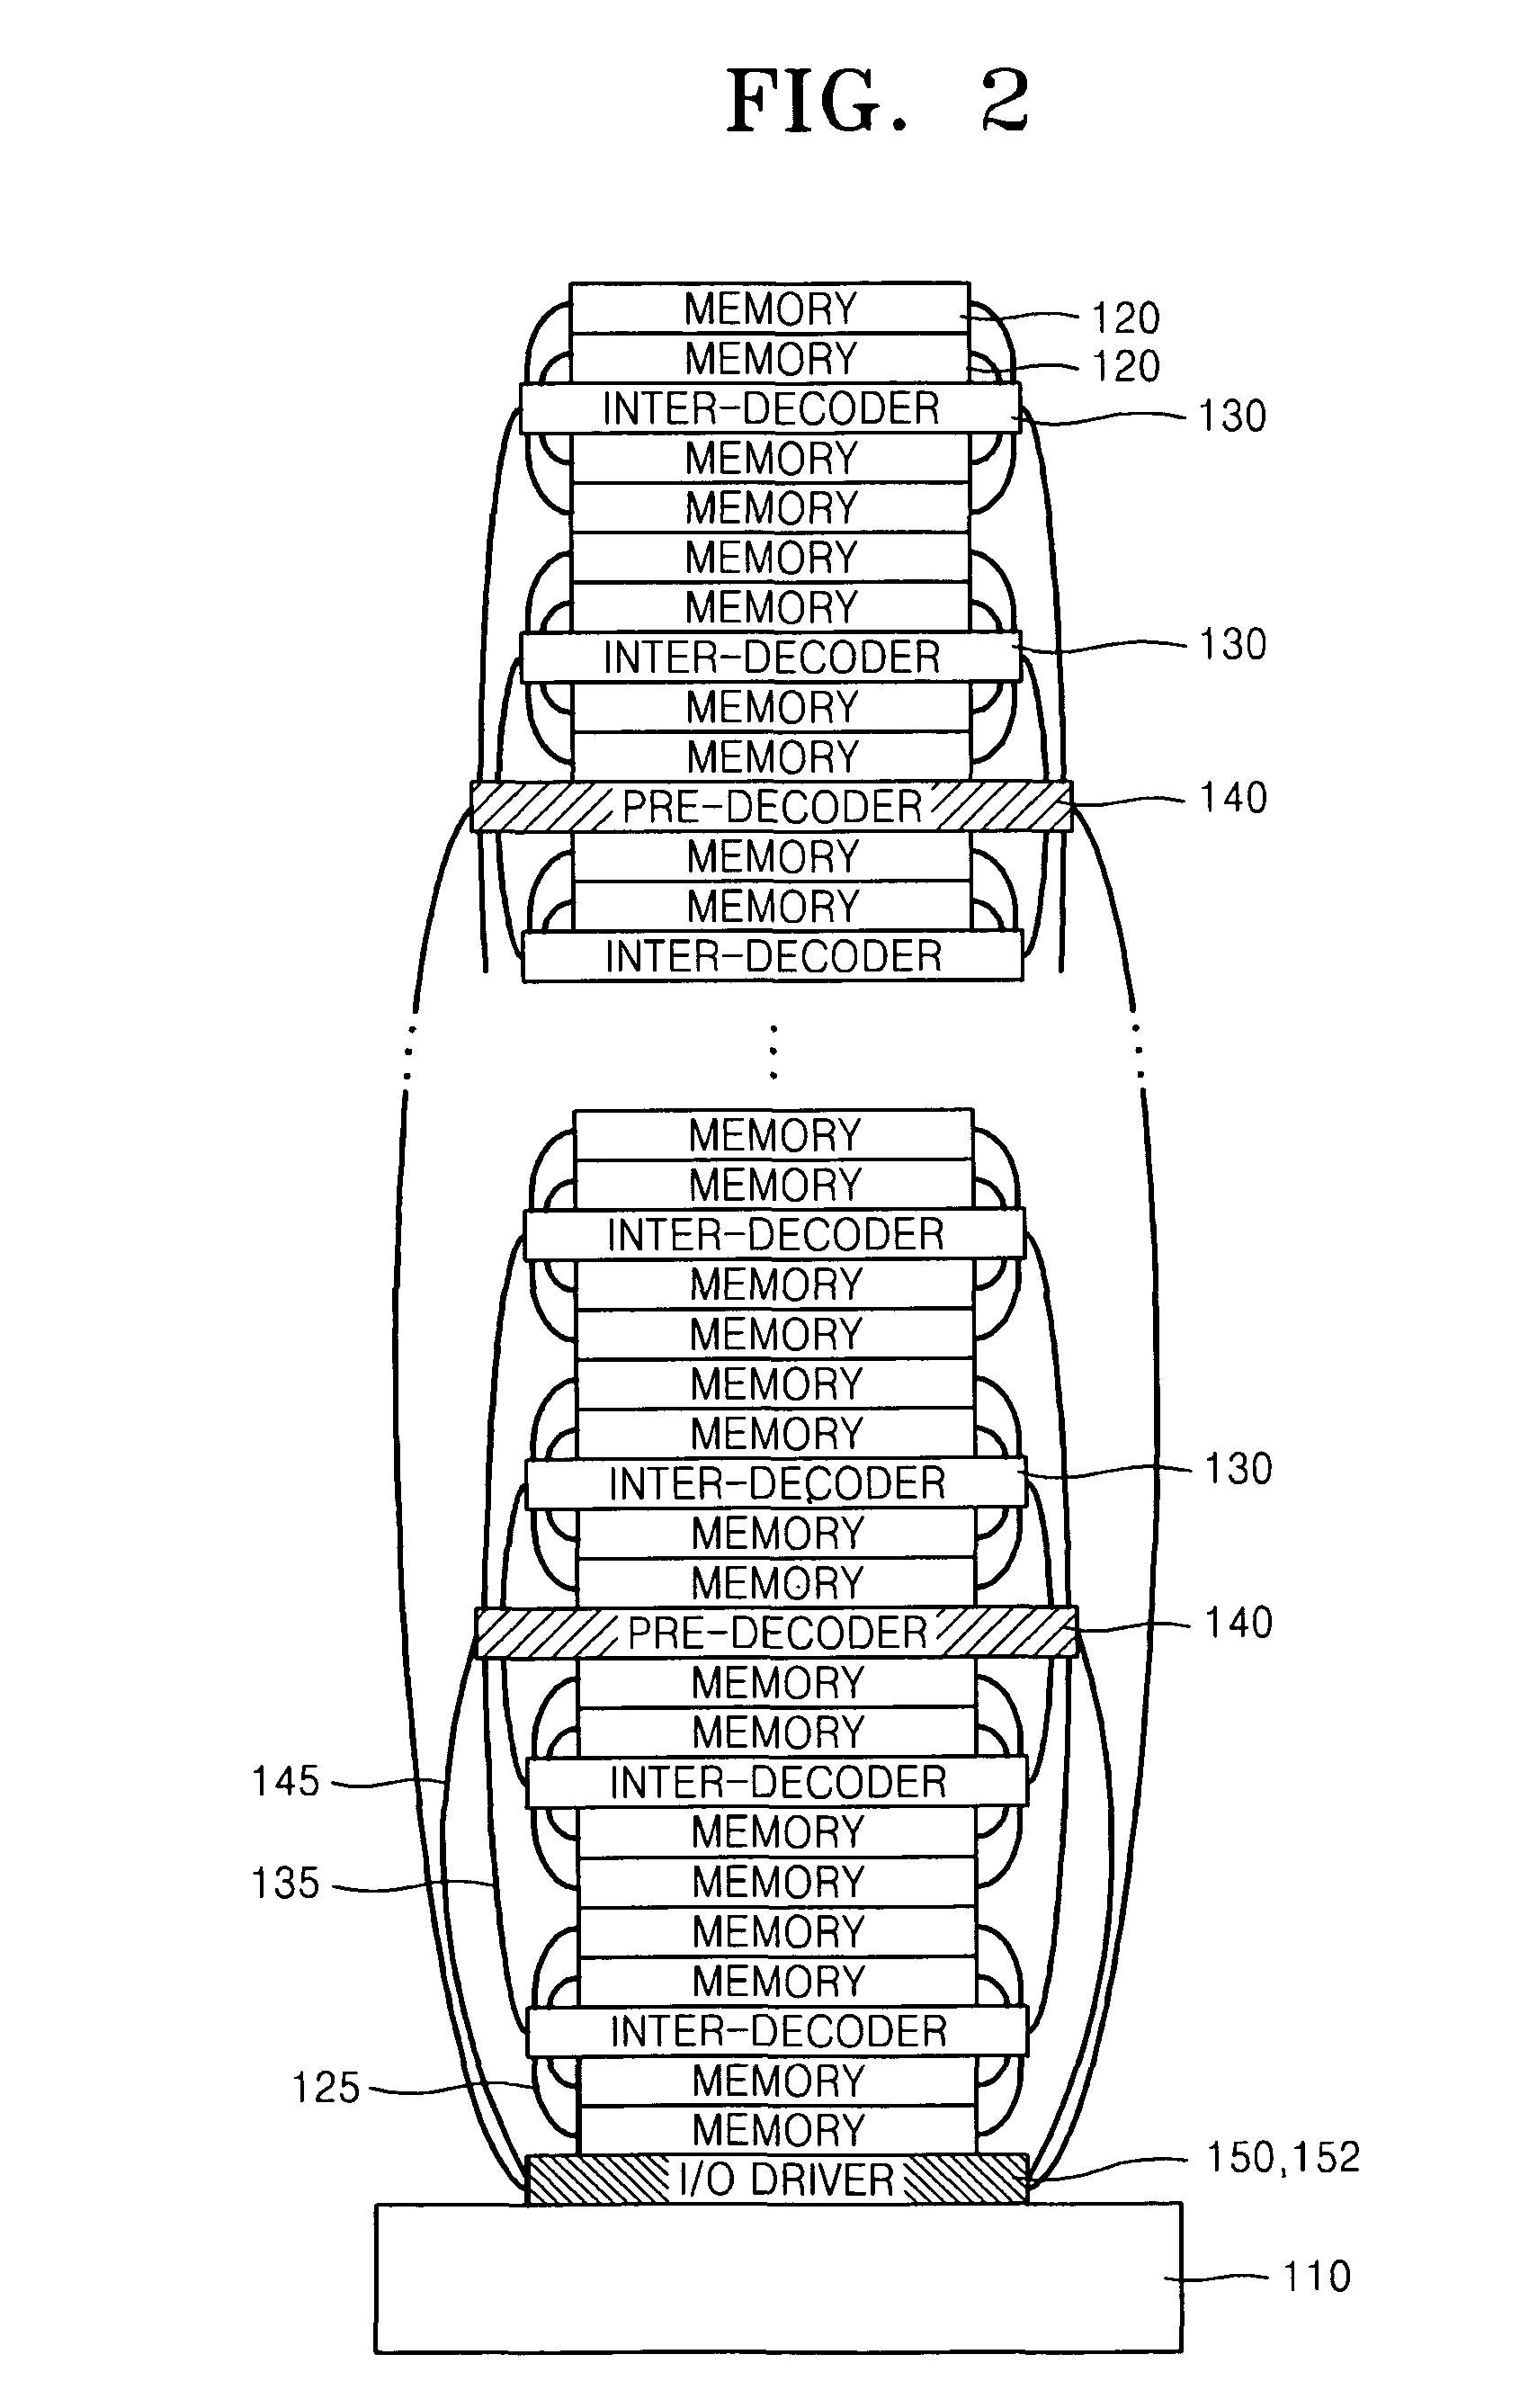 Stacked memory device including a pre-decoder/pre-driver sandwiched between a plurality of inter-decoders/inter-drivers